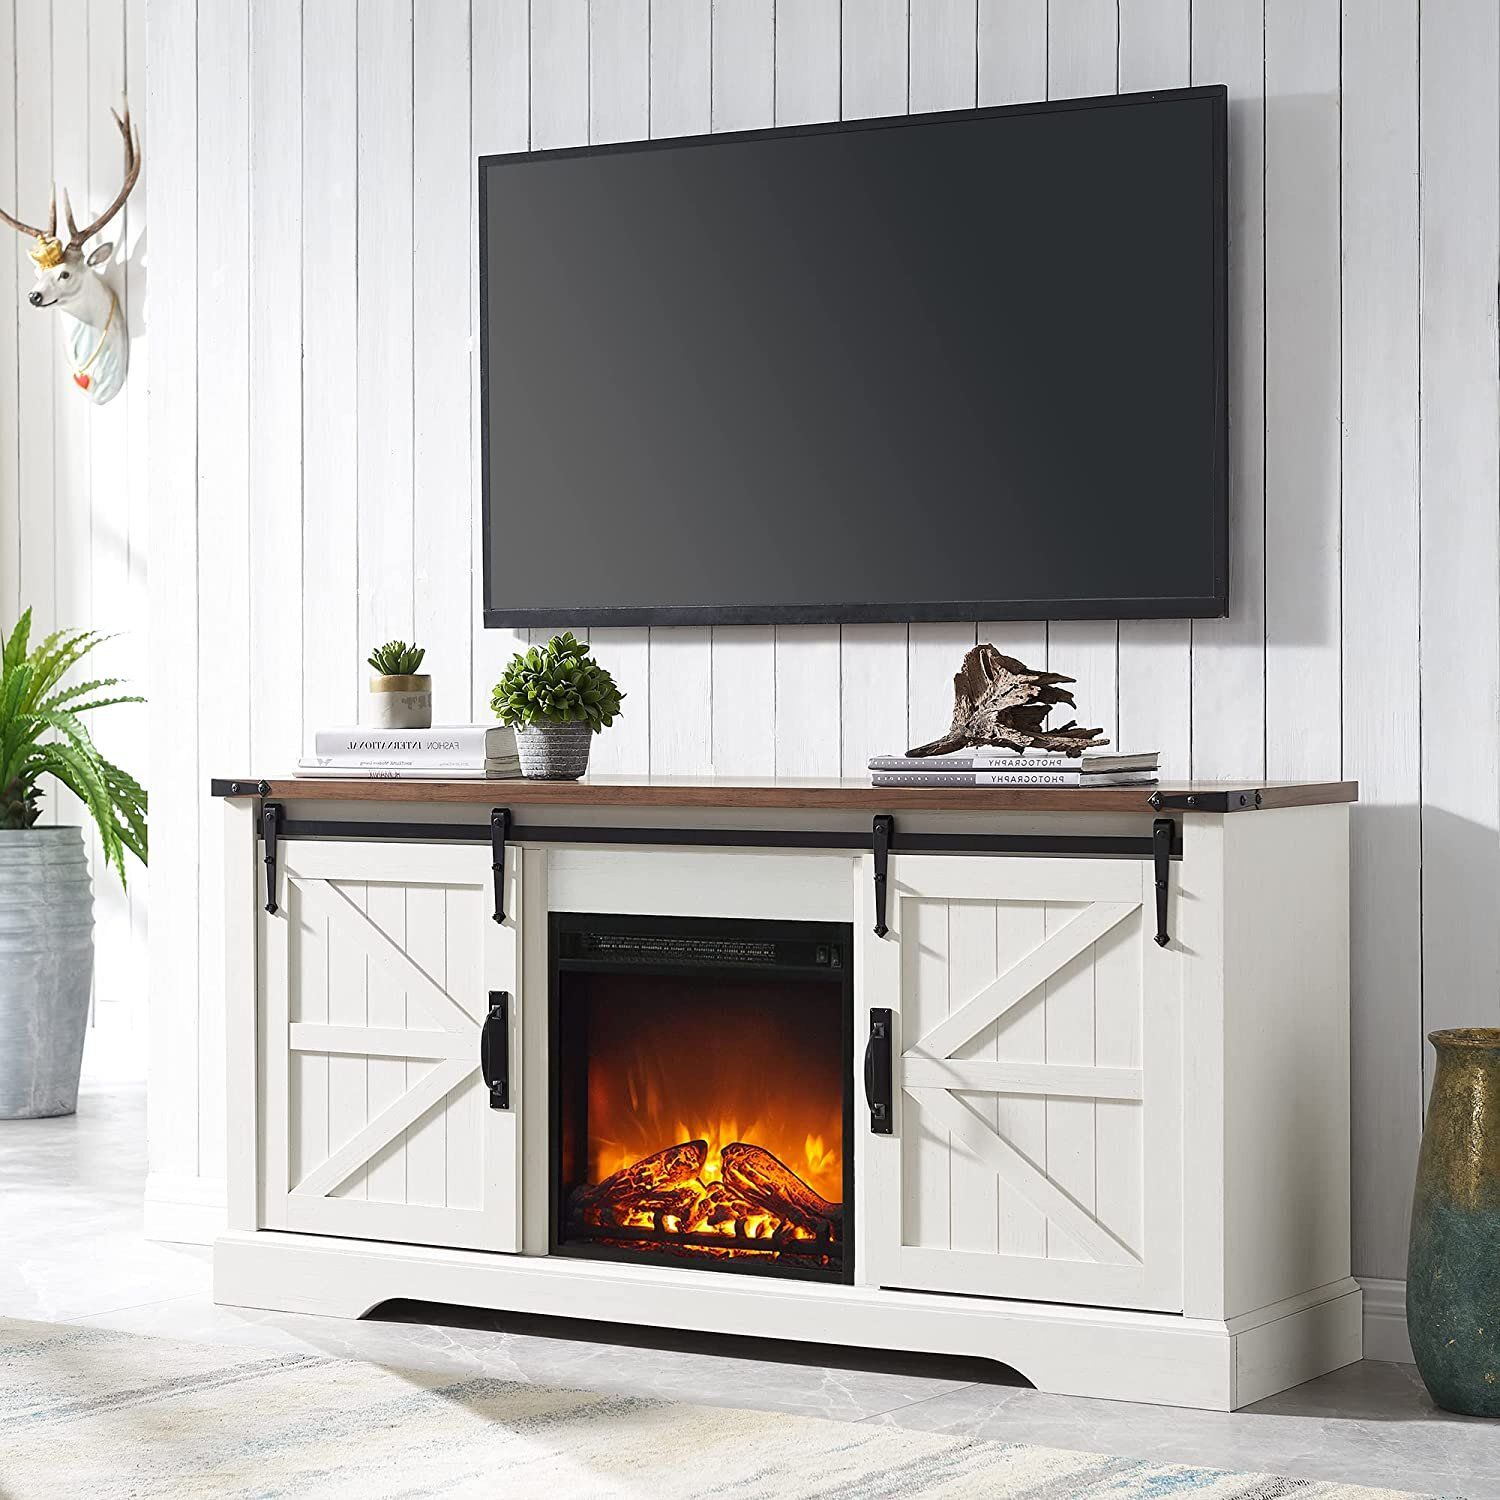 Gracie Oaks Farmhouse Tv Stand For 65 Inch Tv With 18" Electric Fireplace,  Sliding Barn Door, Adjustable Storage & Reviews | Wayfair Throughout Farmhouse Stands With Shelves (View 11 of 15)